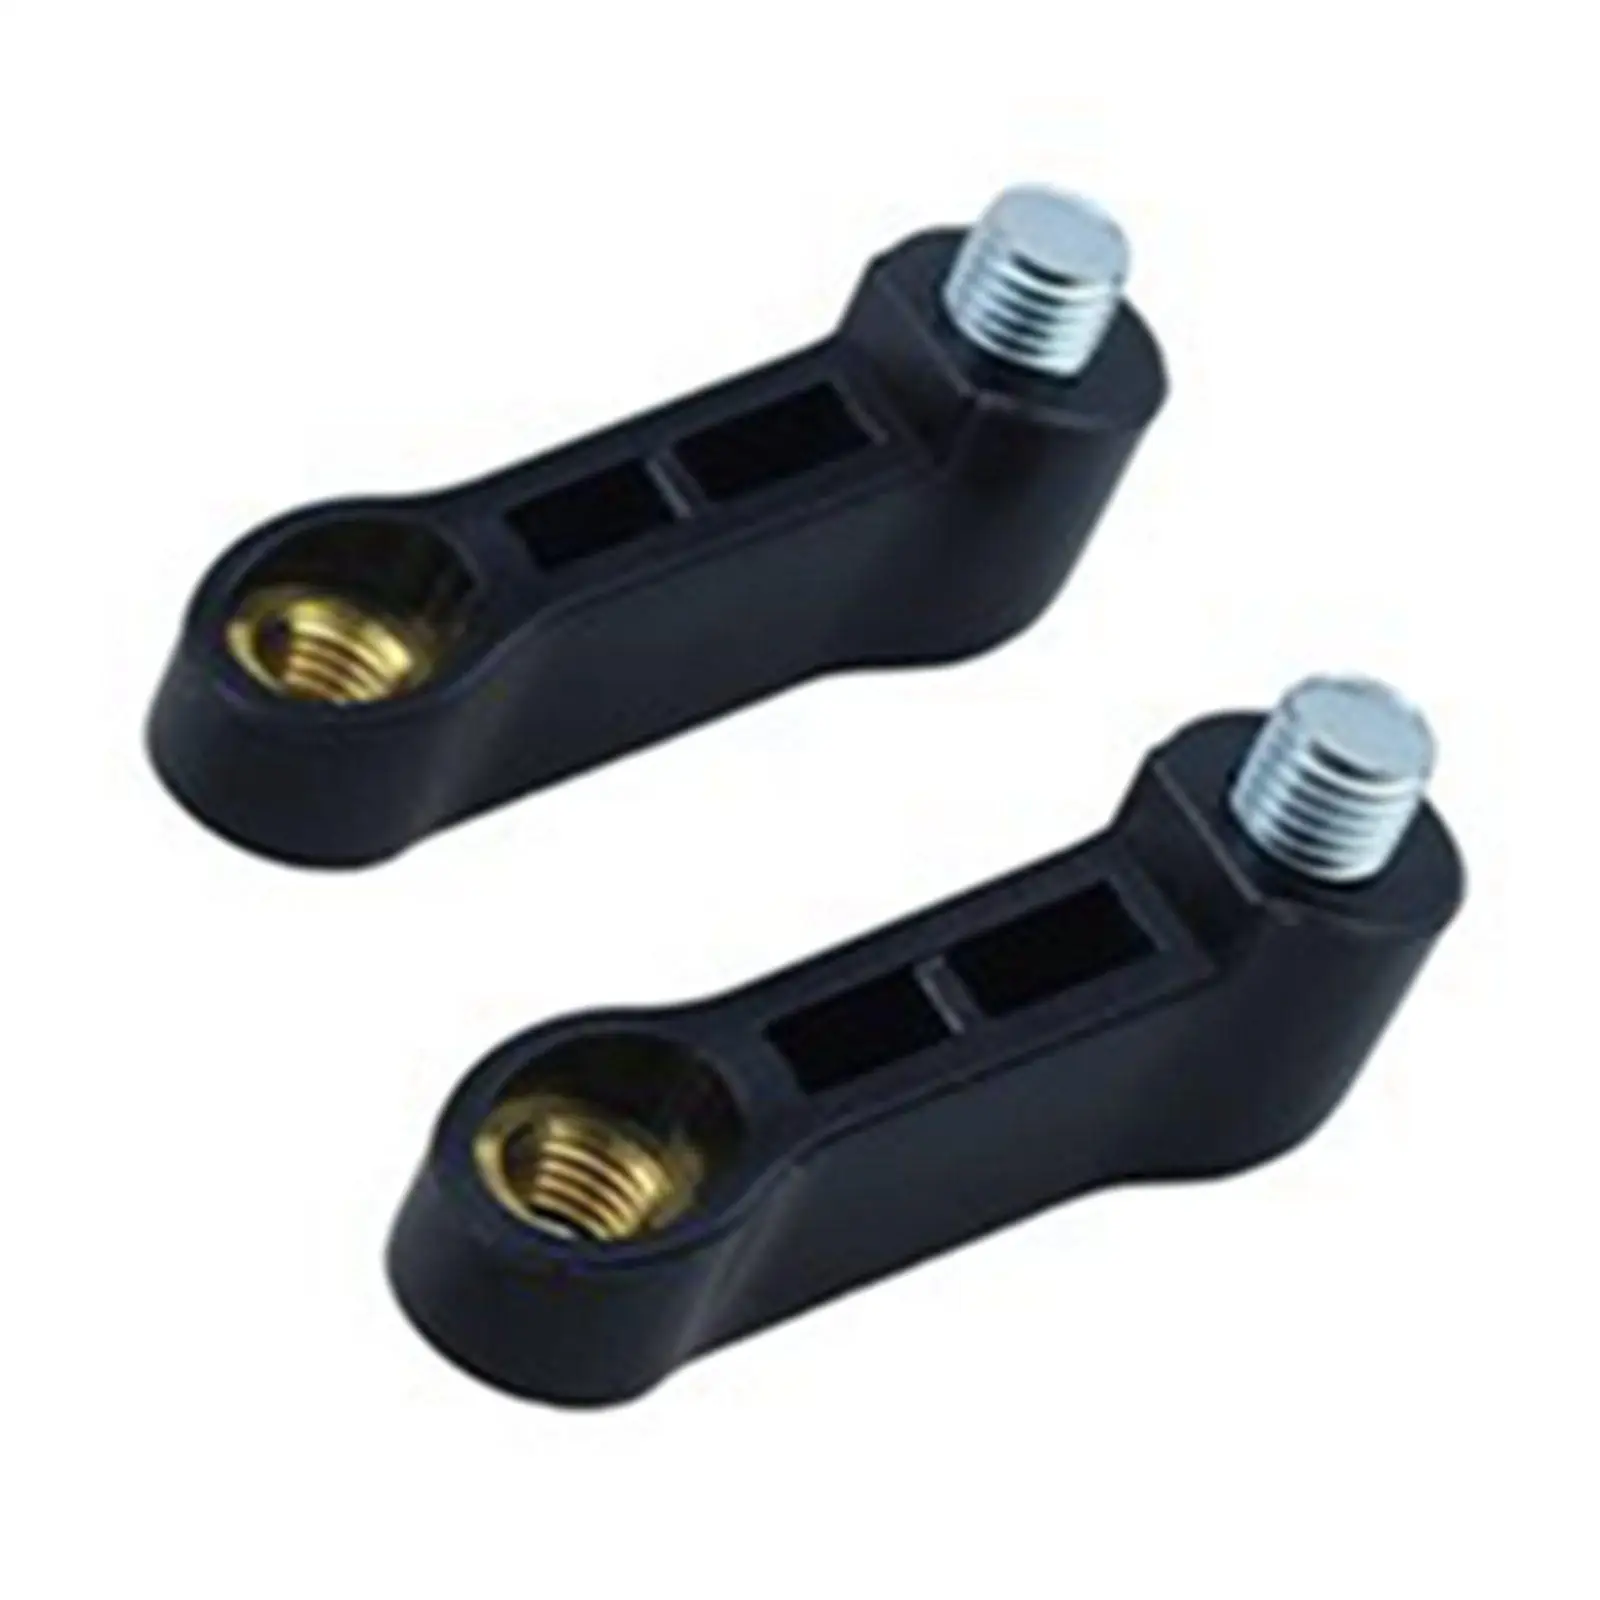 10mm Motorcycle Rear View  Riser Extender Adapter Bracket ,Black Advanced manufacturing technology